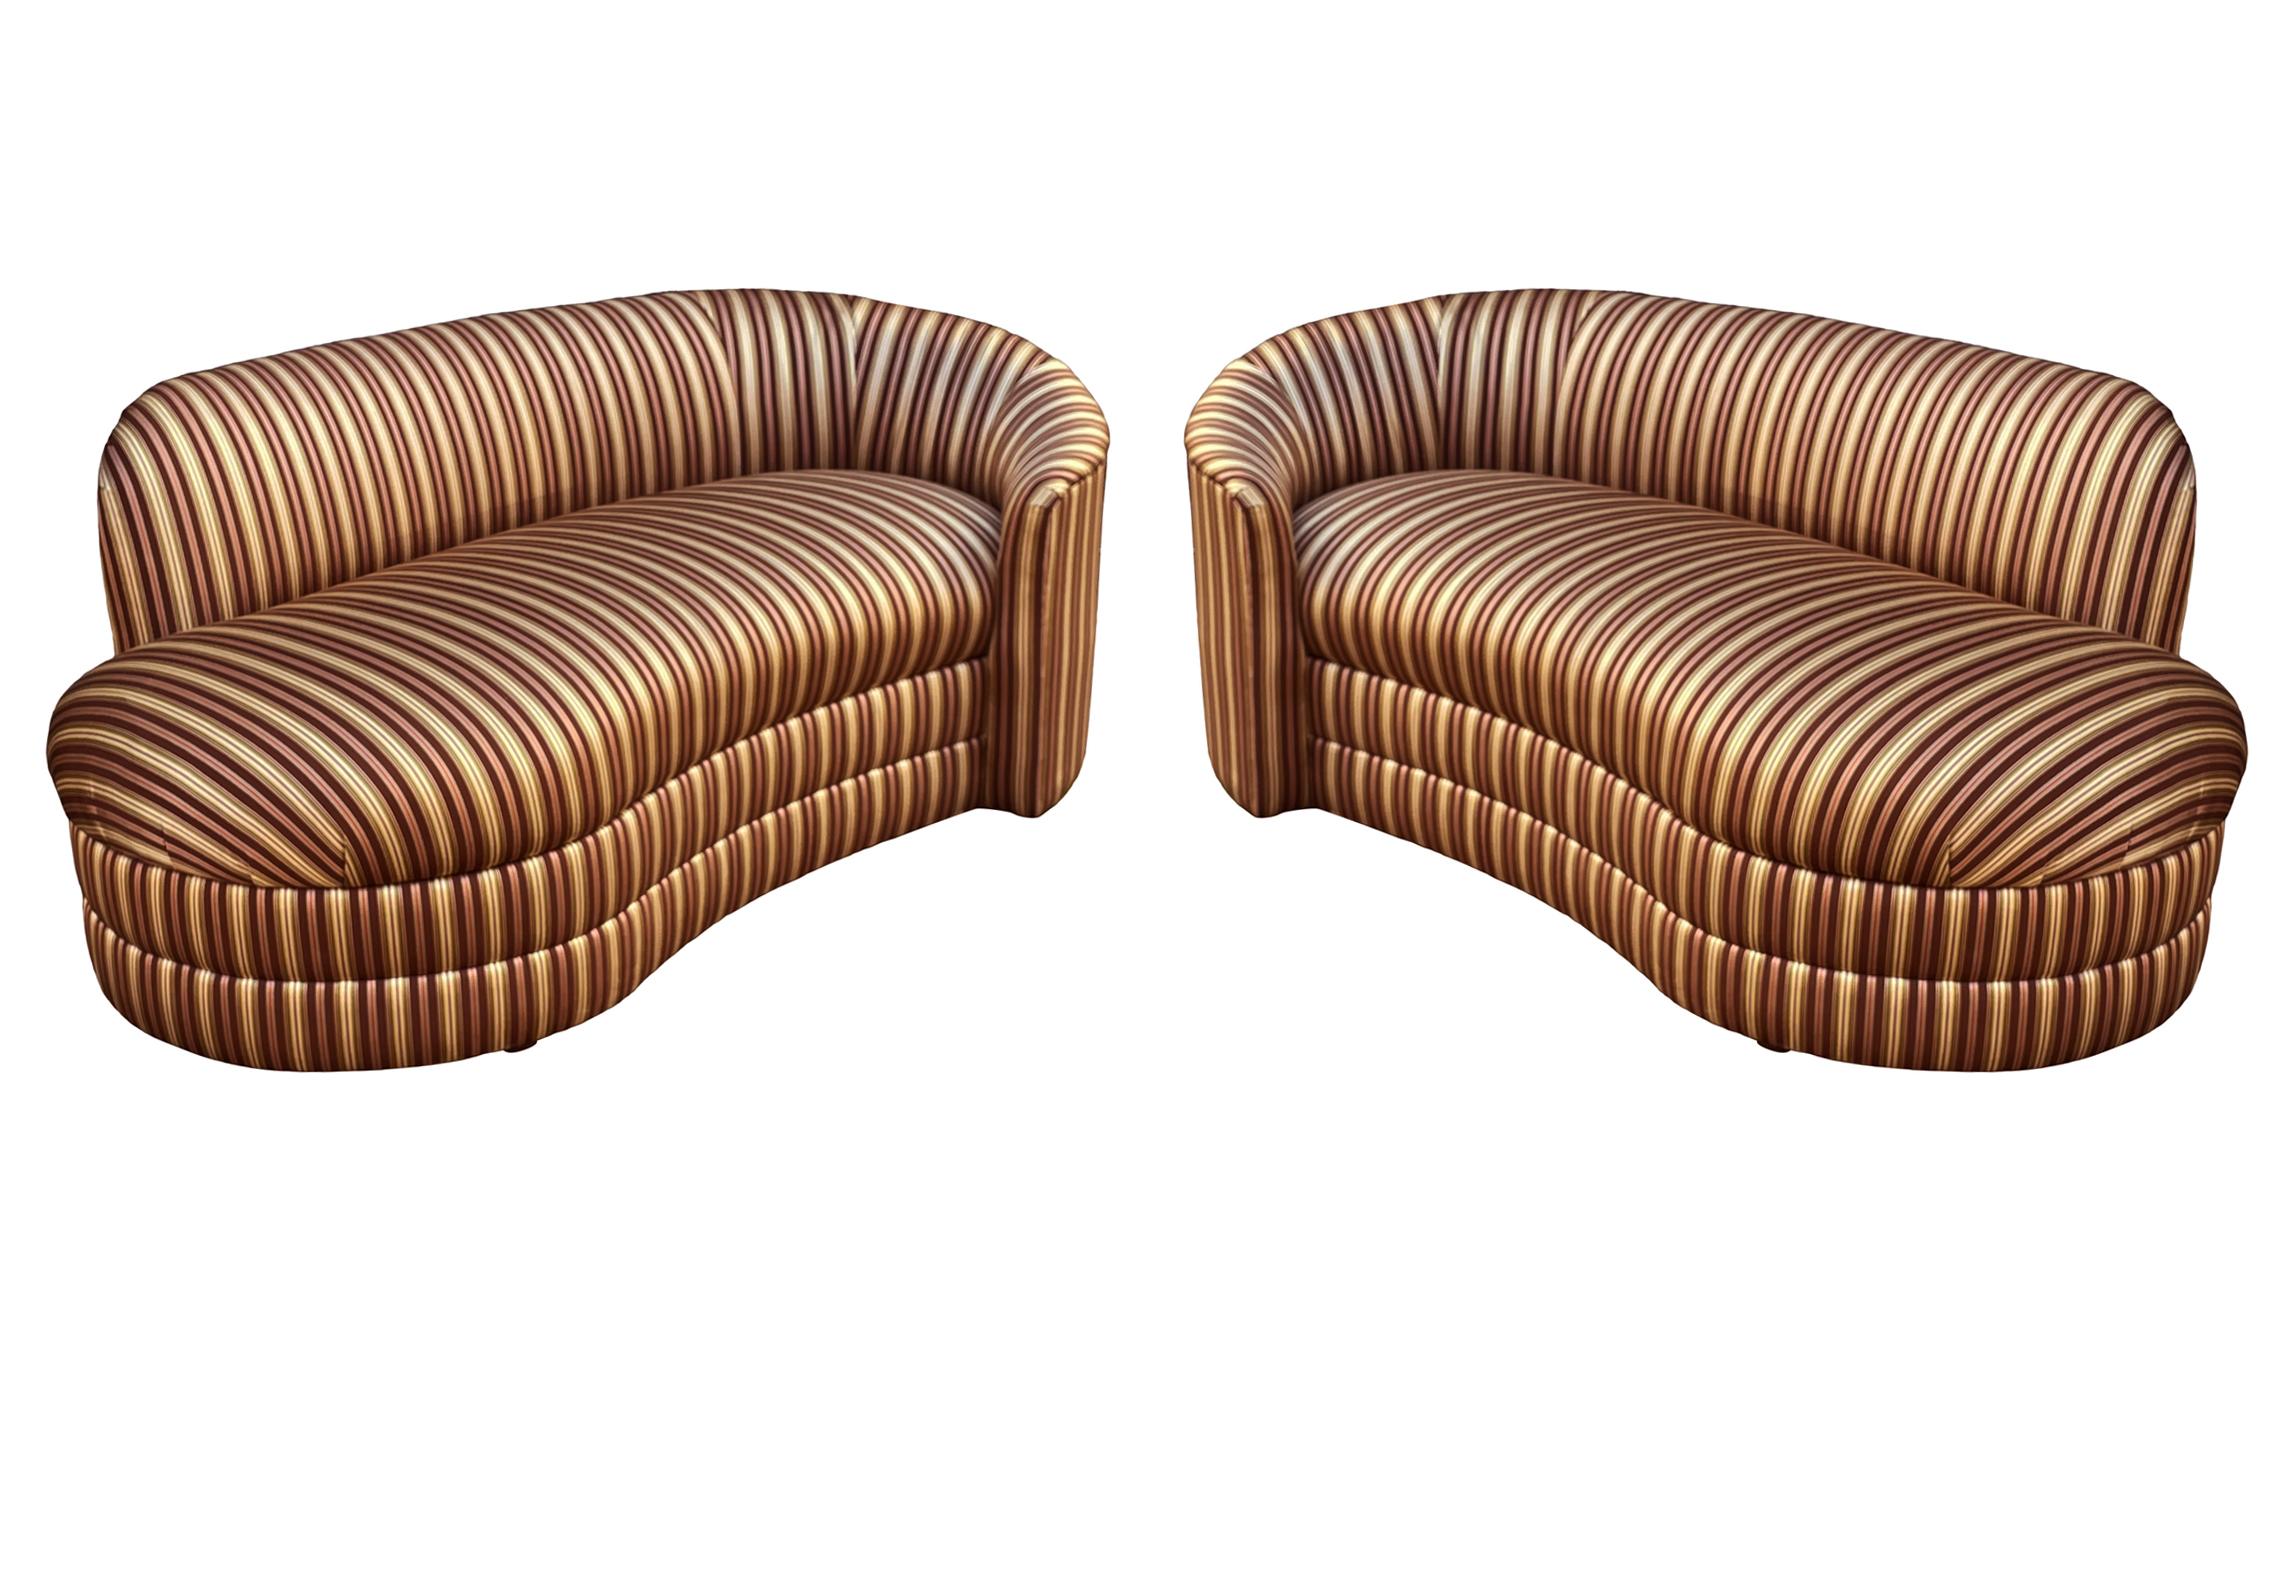 Pair of Hollywood Regency Opposing Curved Chaise Lounges, Sofas or Loveseats  For Sale 10